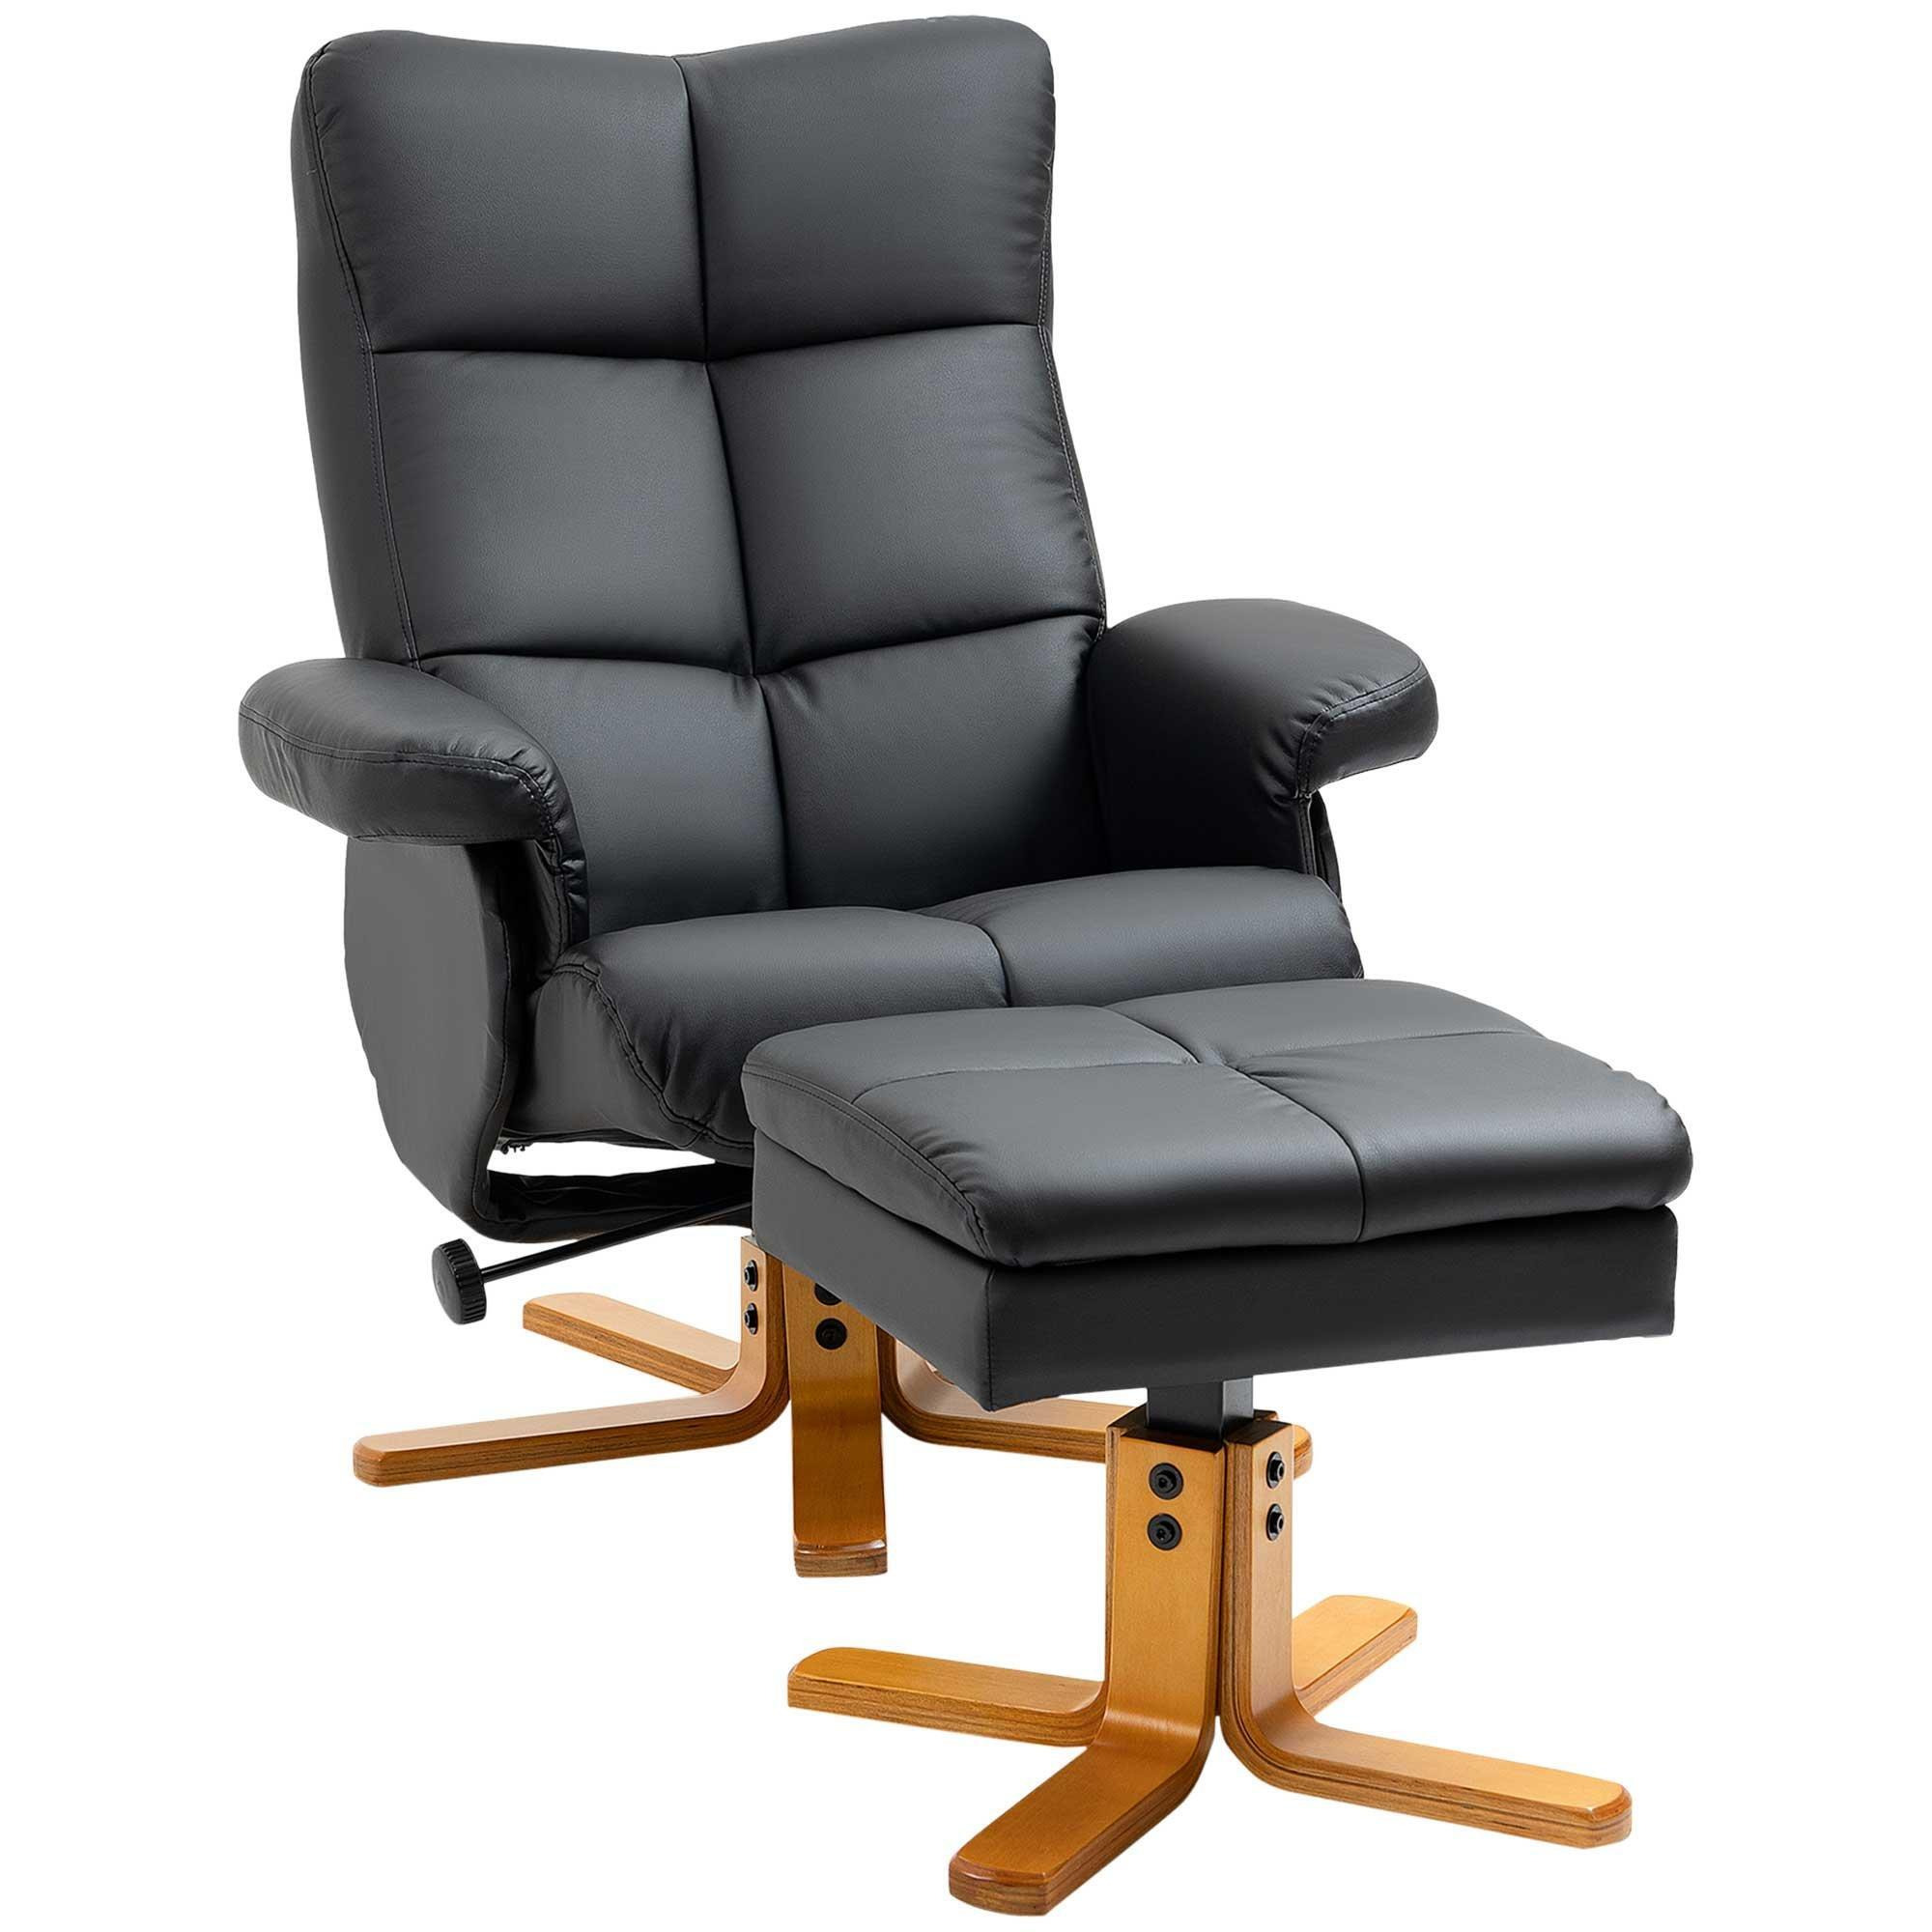 Faux Leather Recliner Chair with Ottoman Footrest Storage Space - image 1